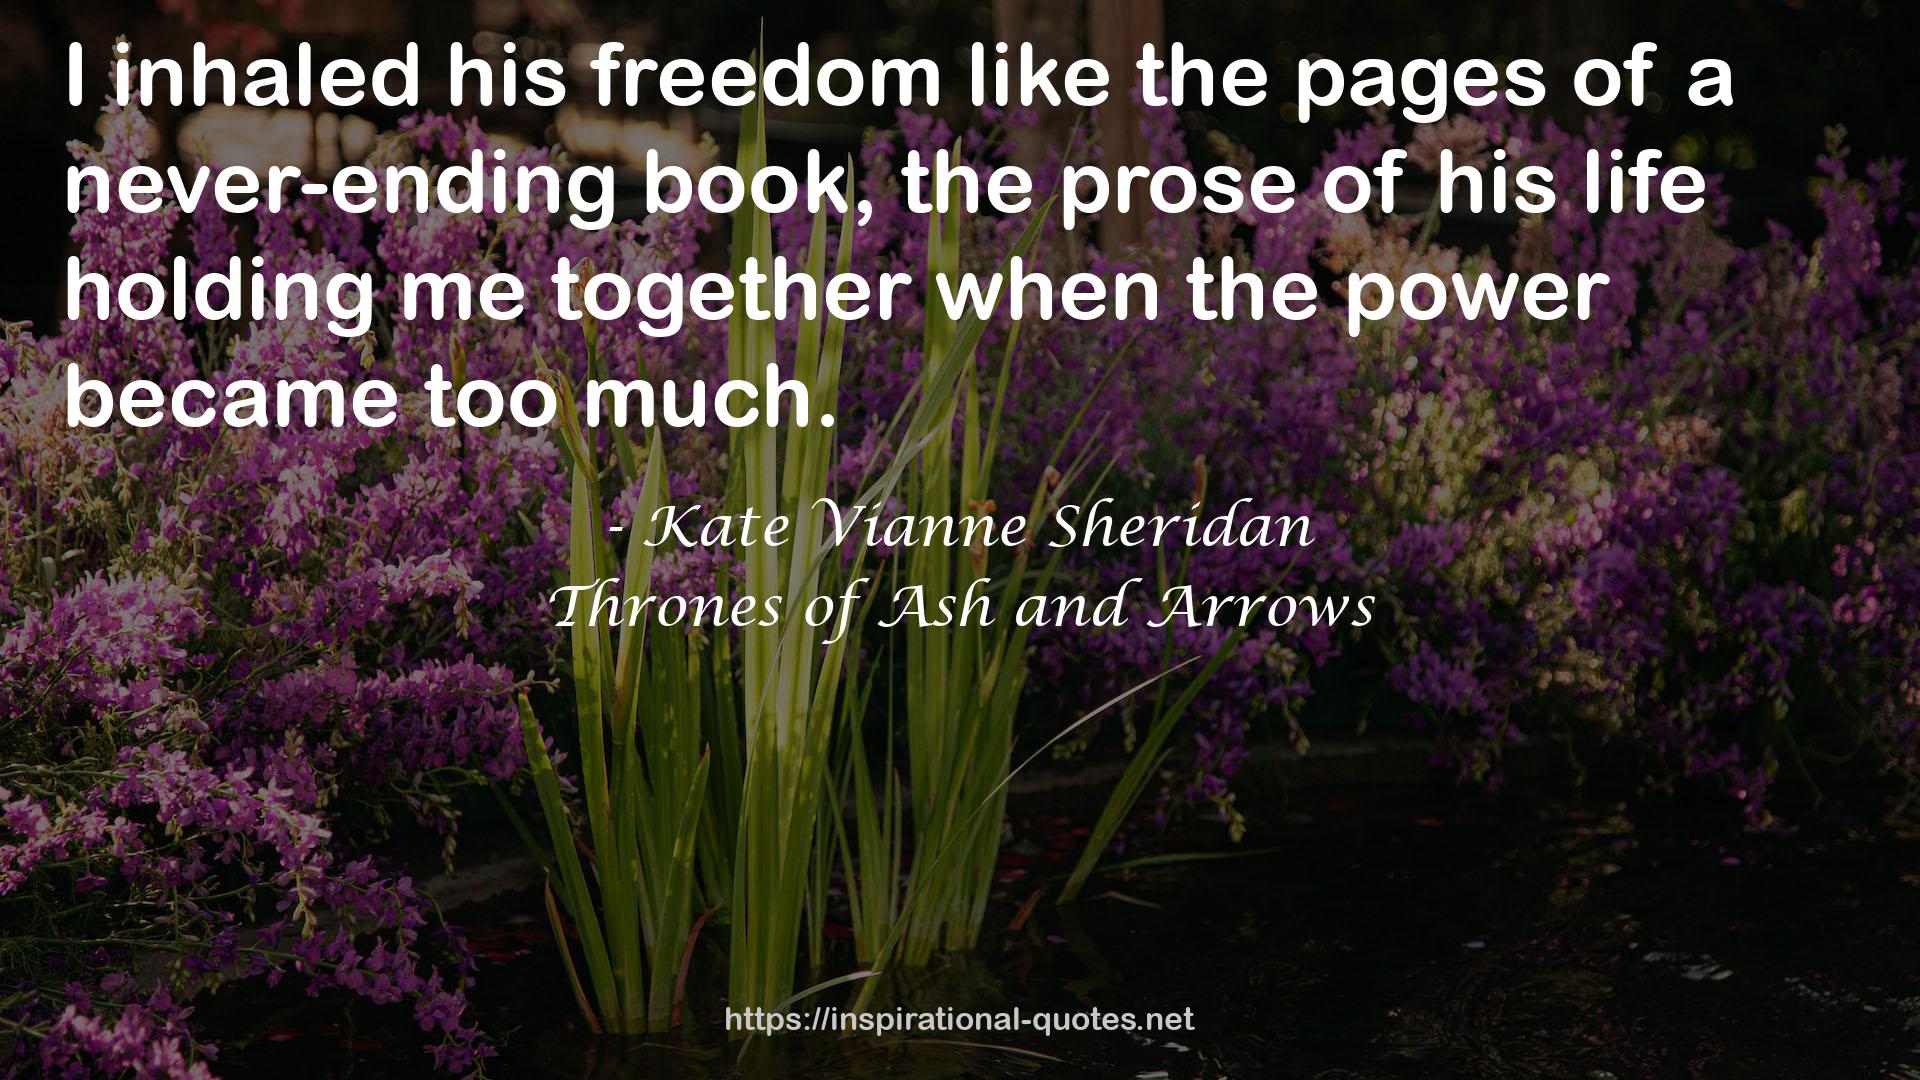 Kate Vianne Sheridan QUOTES